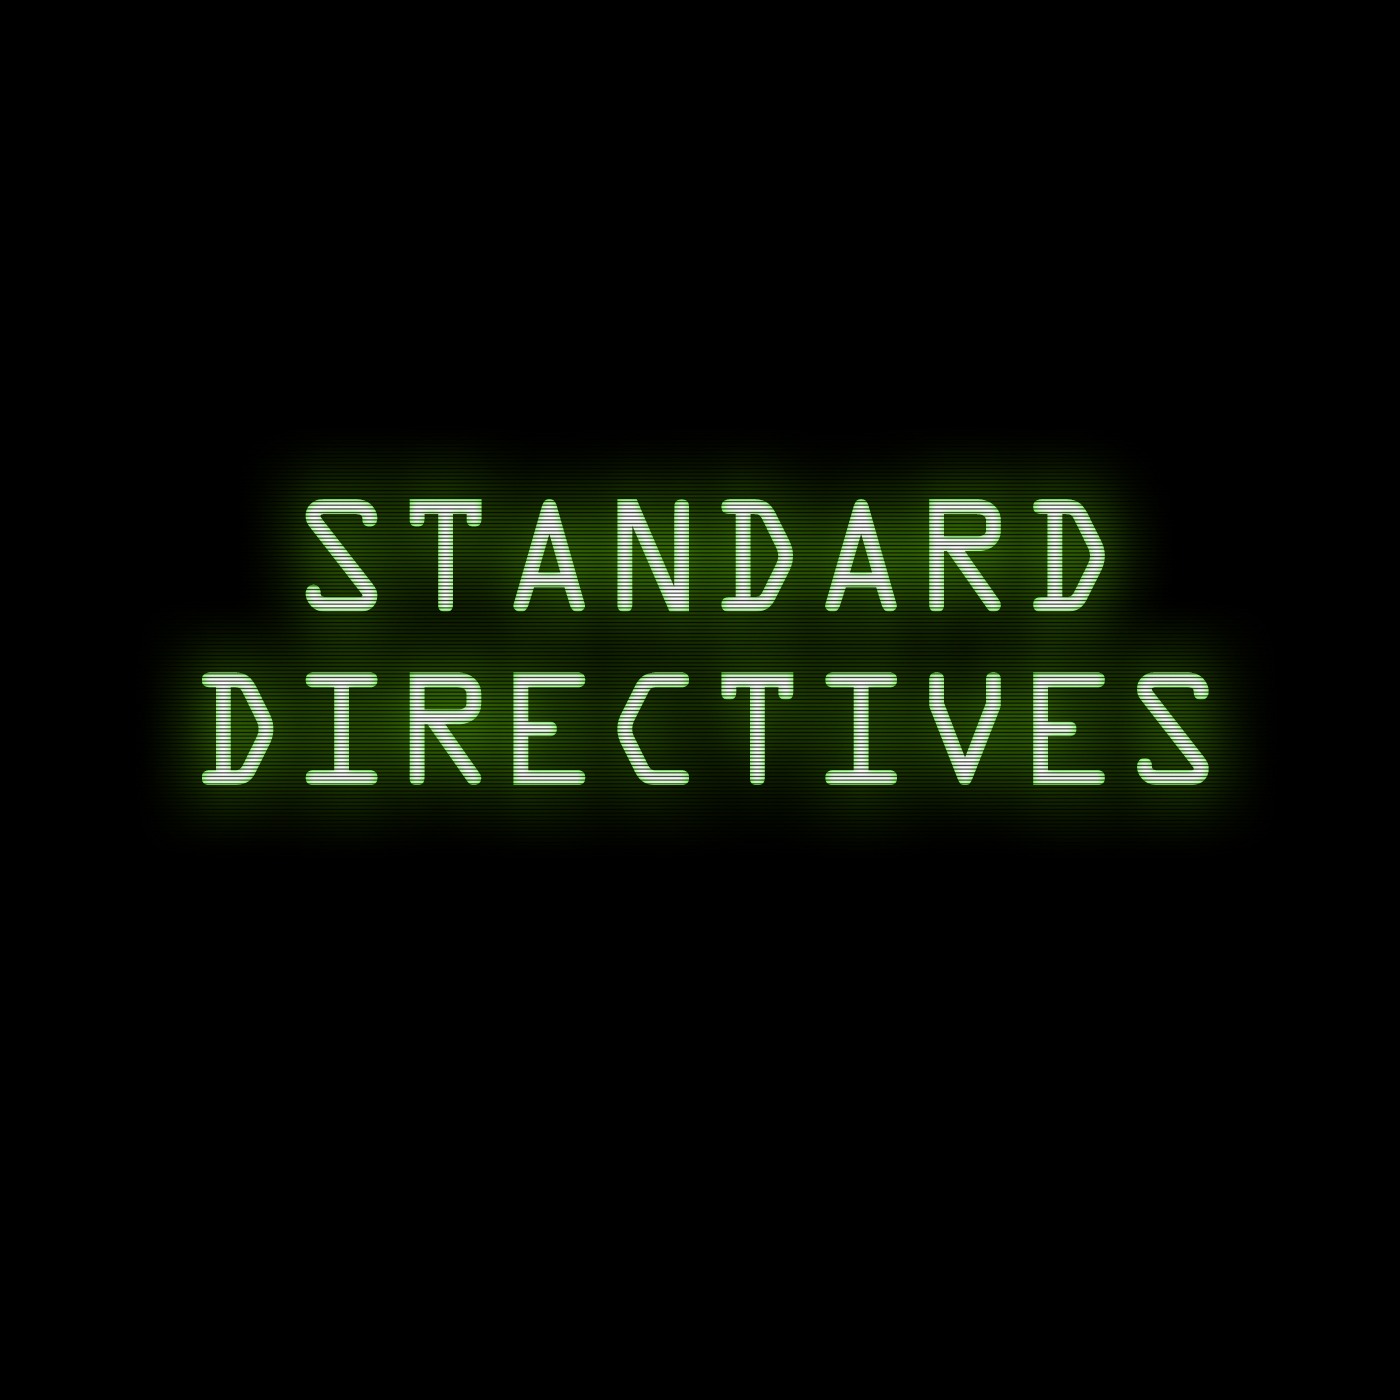 Standard Directive 011: Don’t Care About Any of That